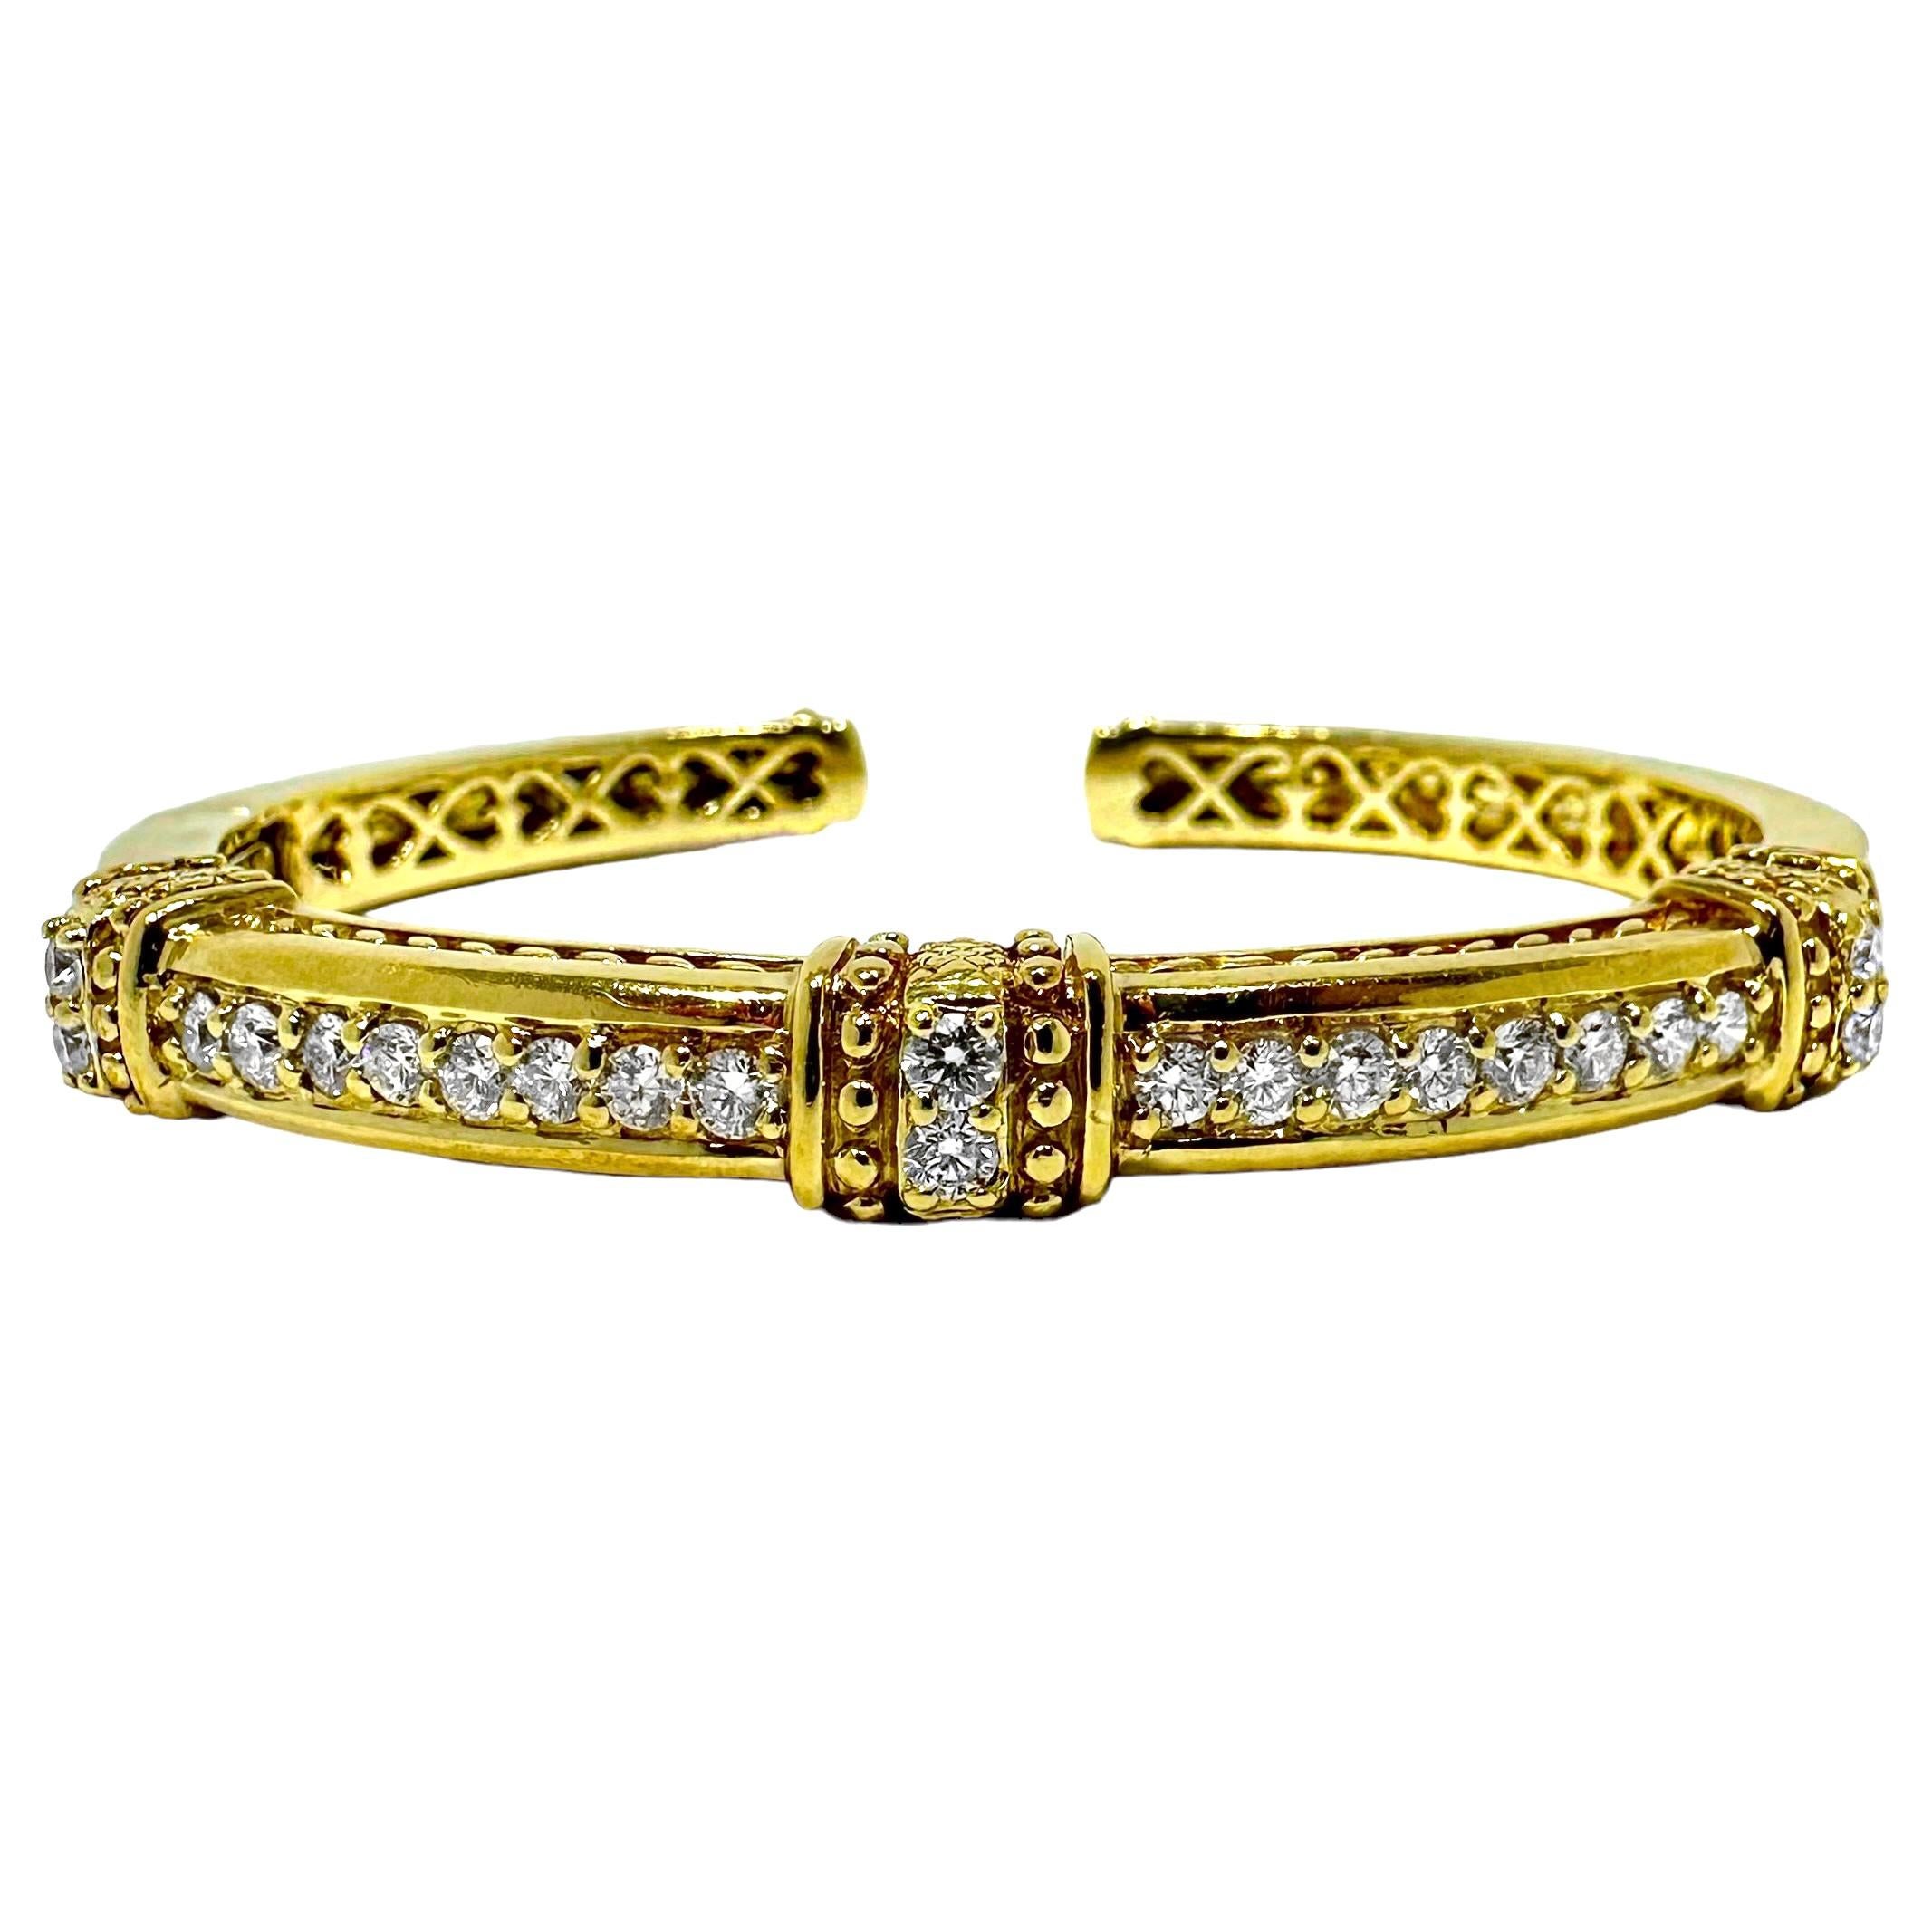 This tasteful, vintage, 18k yellow gold bangle bracelet by designer Judith Ripka, puts on display the best of this highly regarded designer's style and craftsmanship. Great for wearing alone, or for stacking with other bracelets. It is satin finish